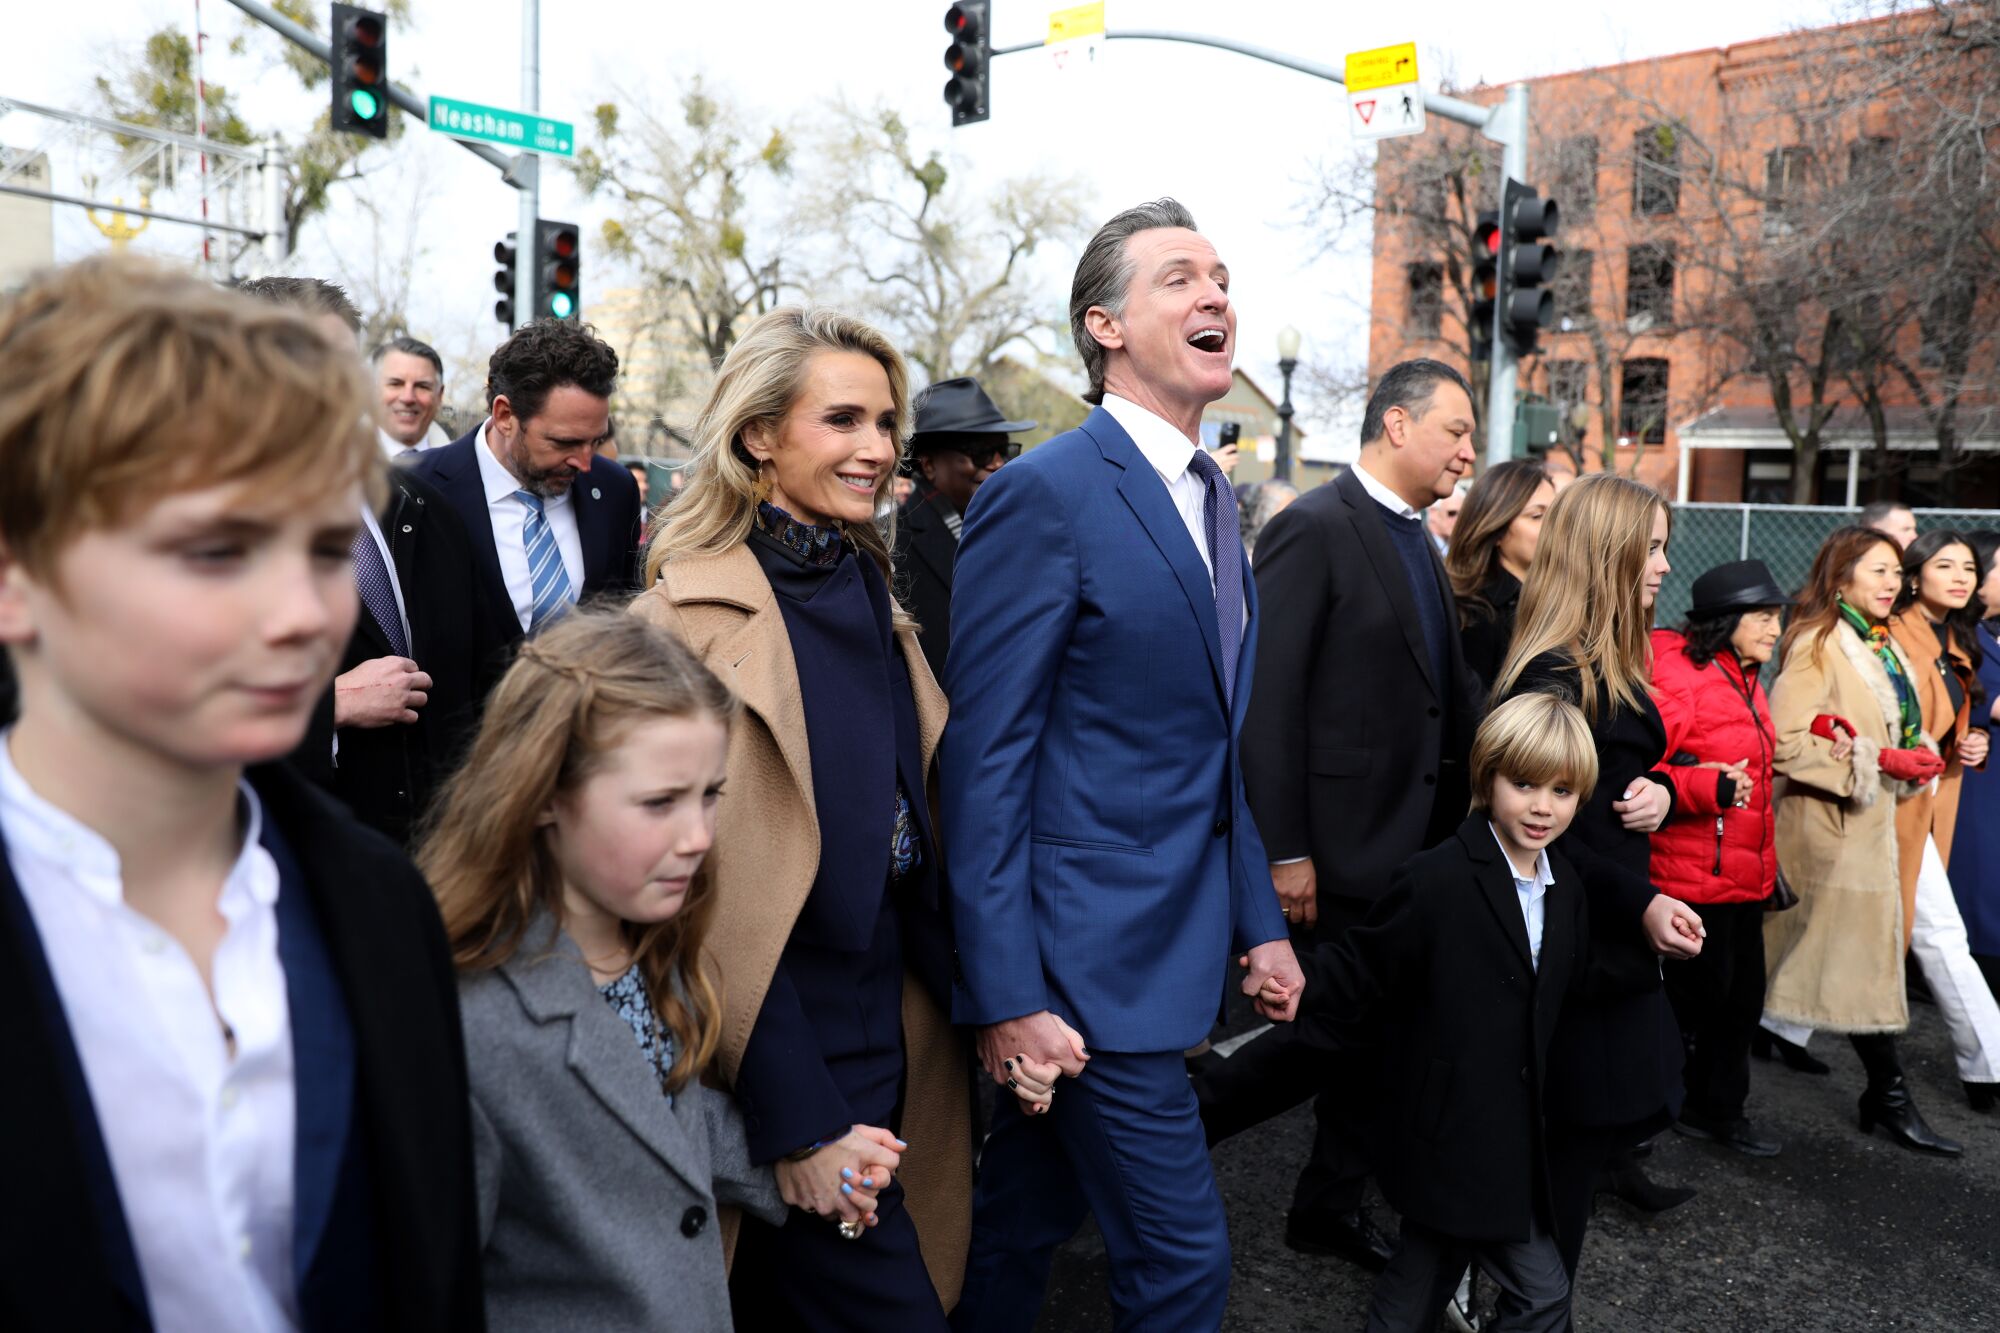 Gov. Gavin Newsom and his family walk hand in hand with a crowd.